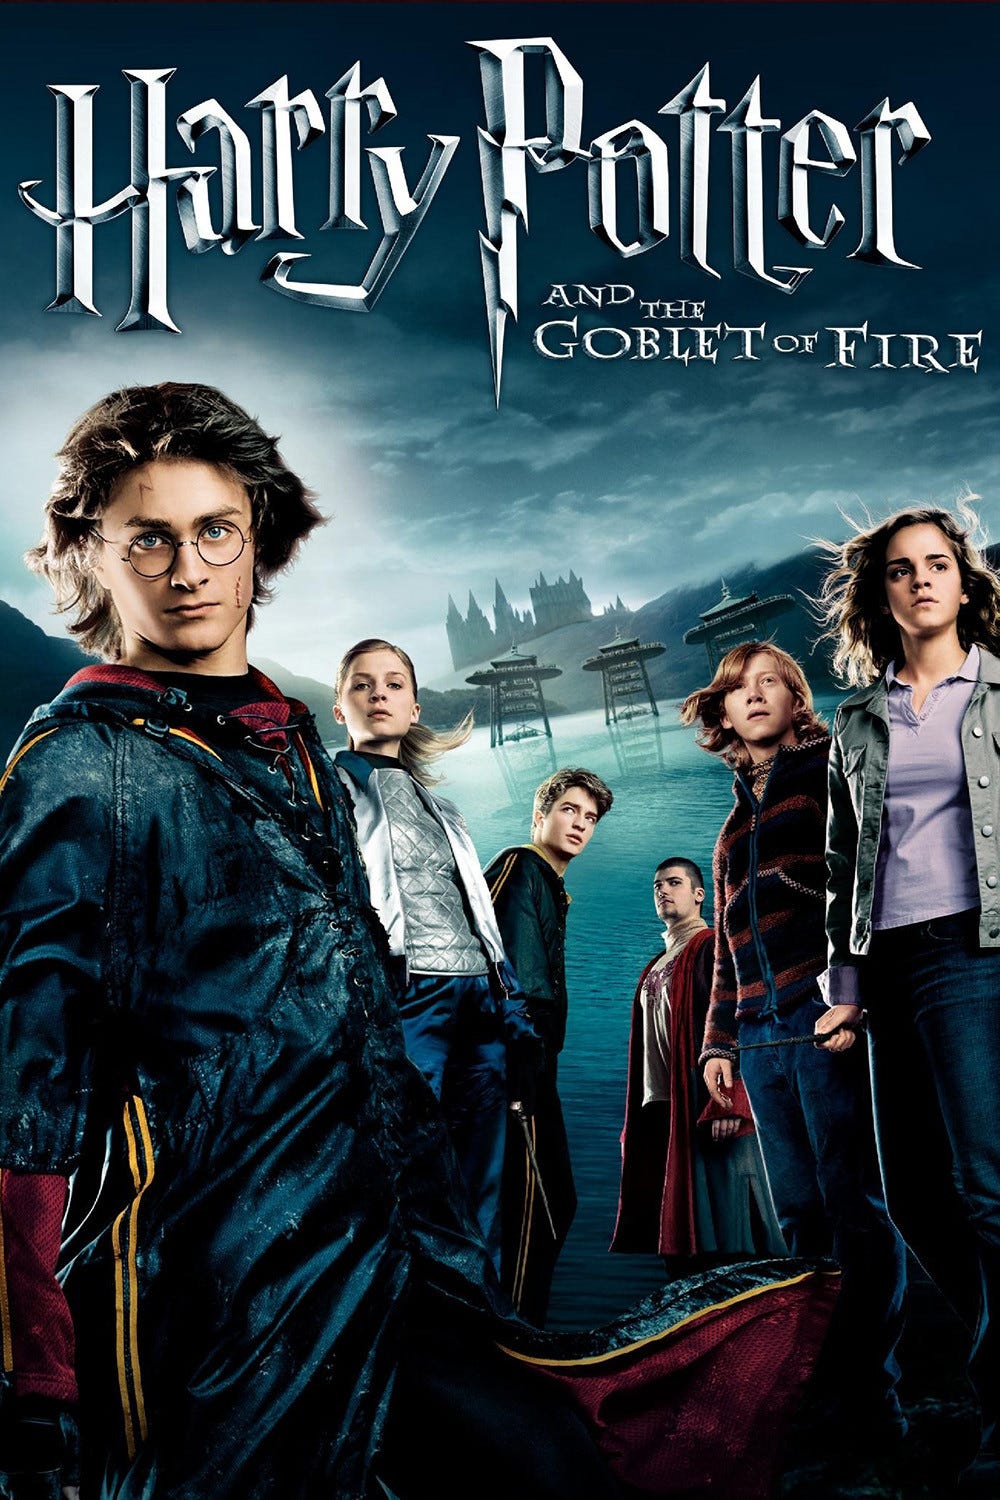 The Ending Of Harry Potter And The Goblet Of Fire Explained